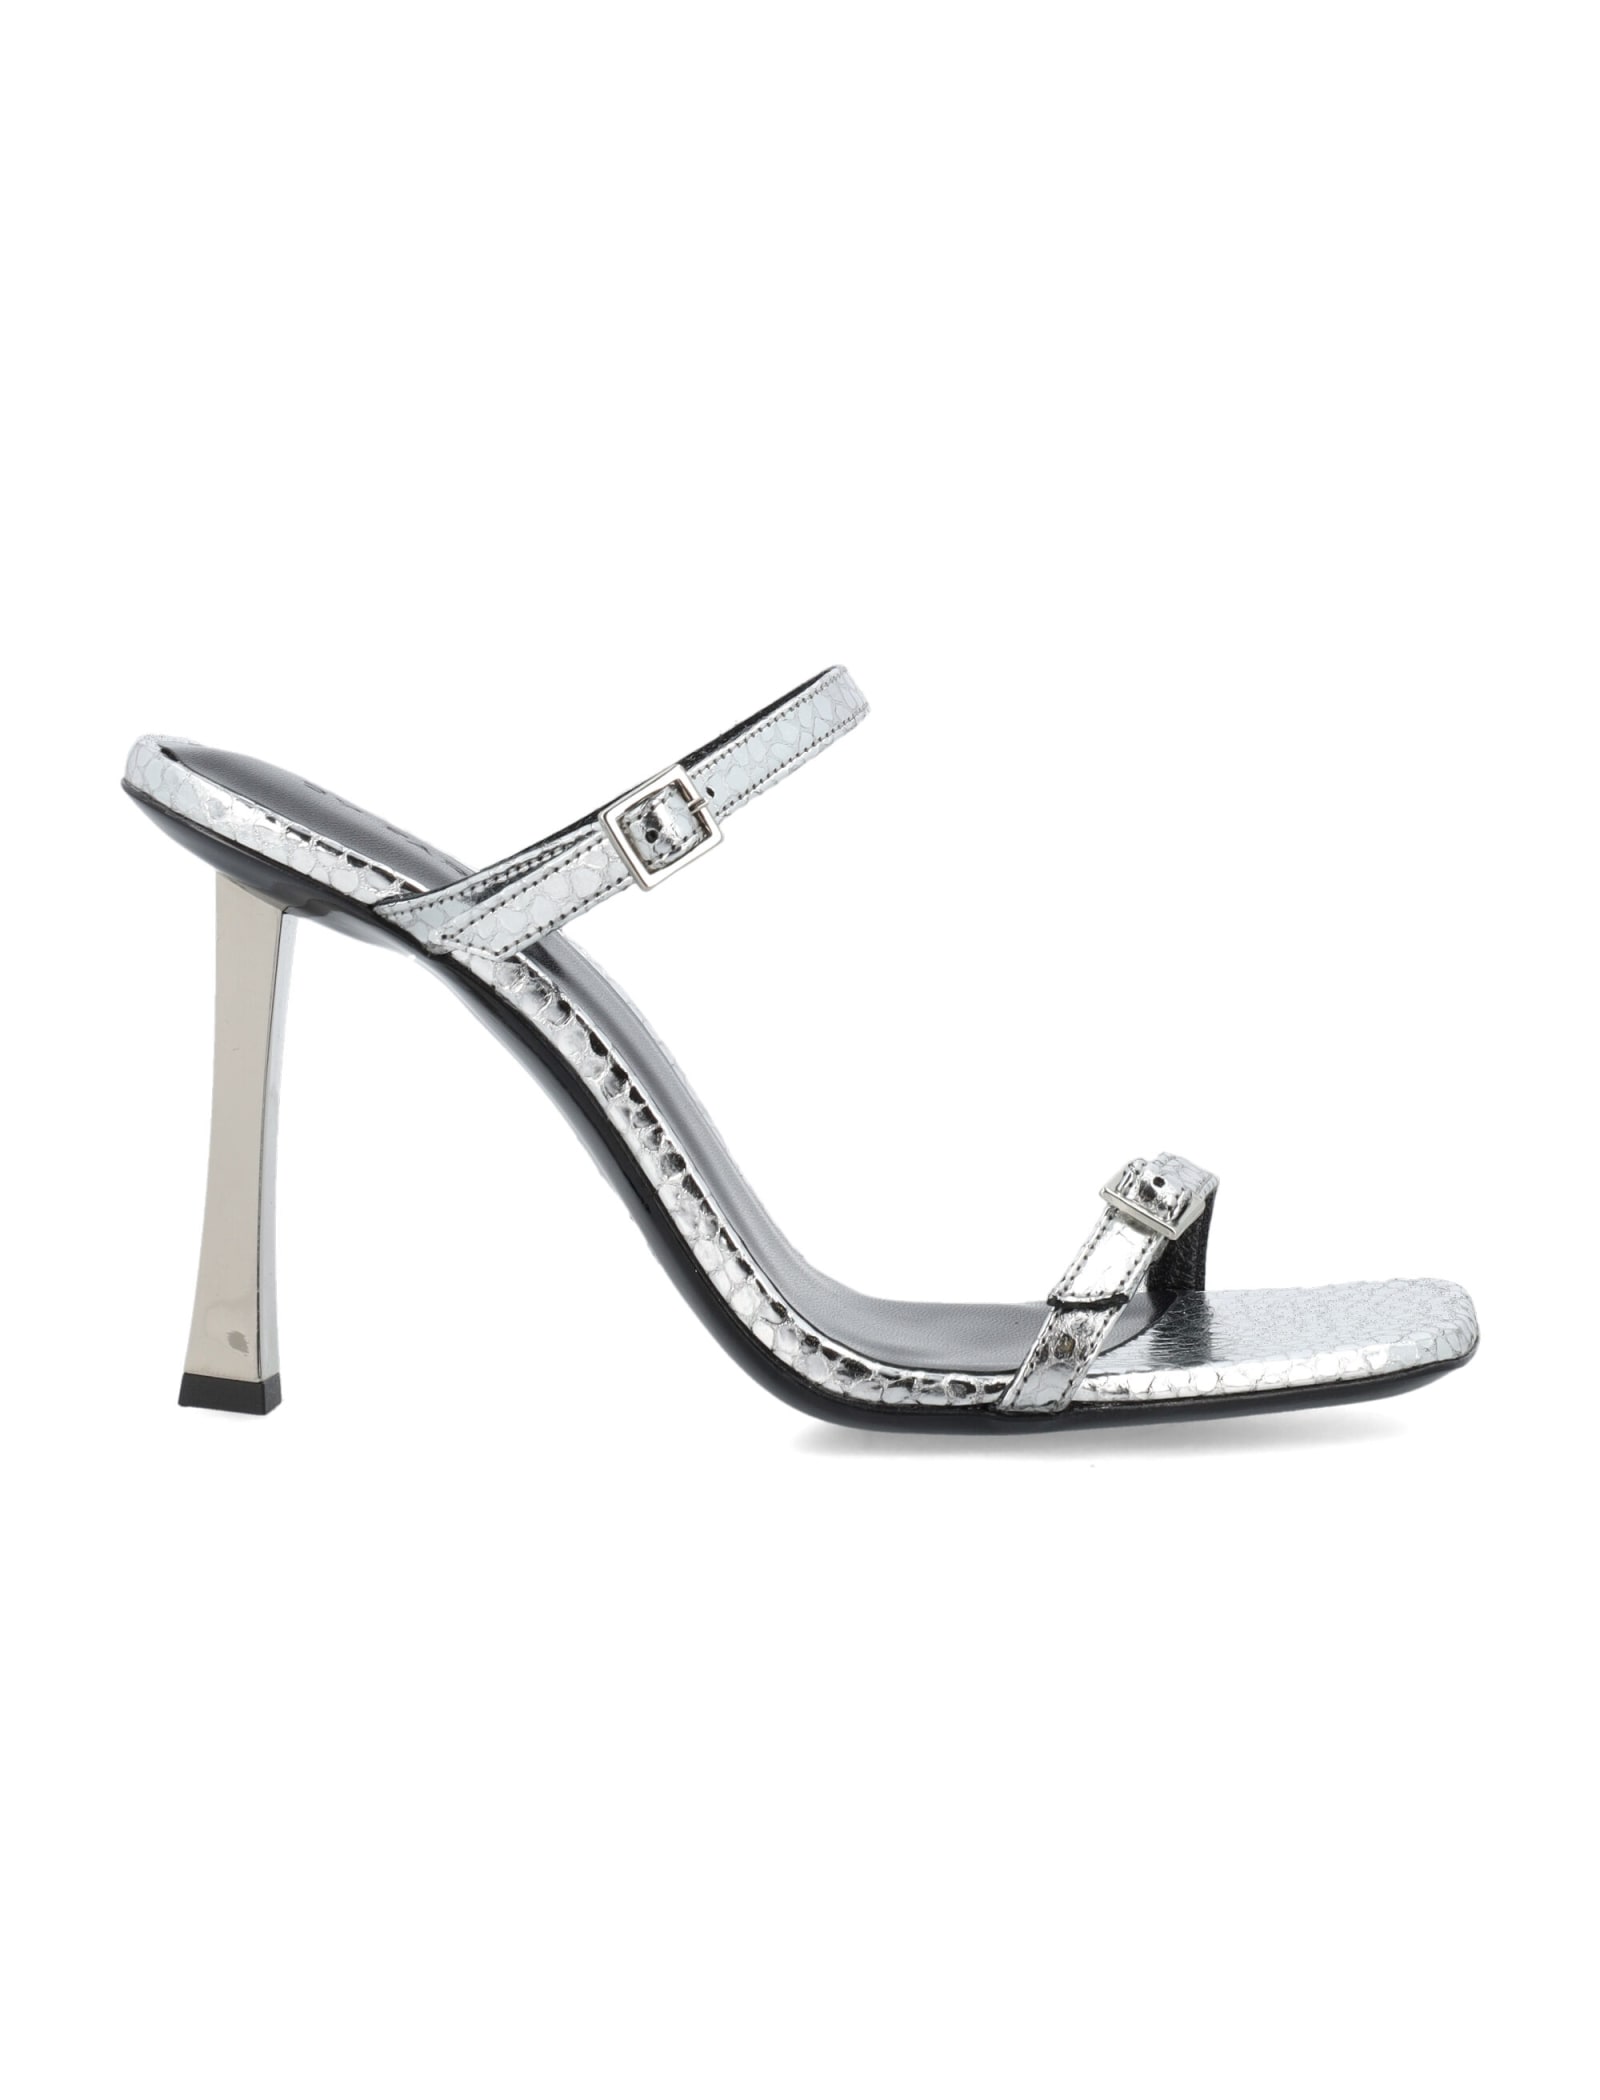 BY FAR Flick Silver Sandals